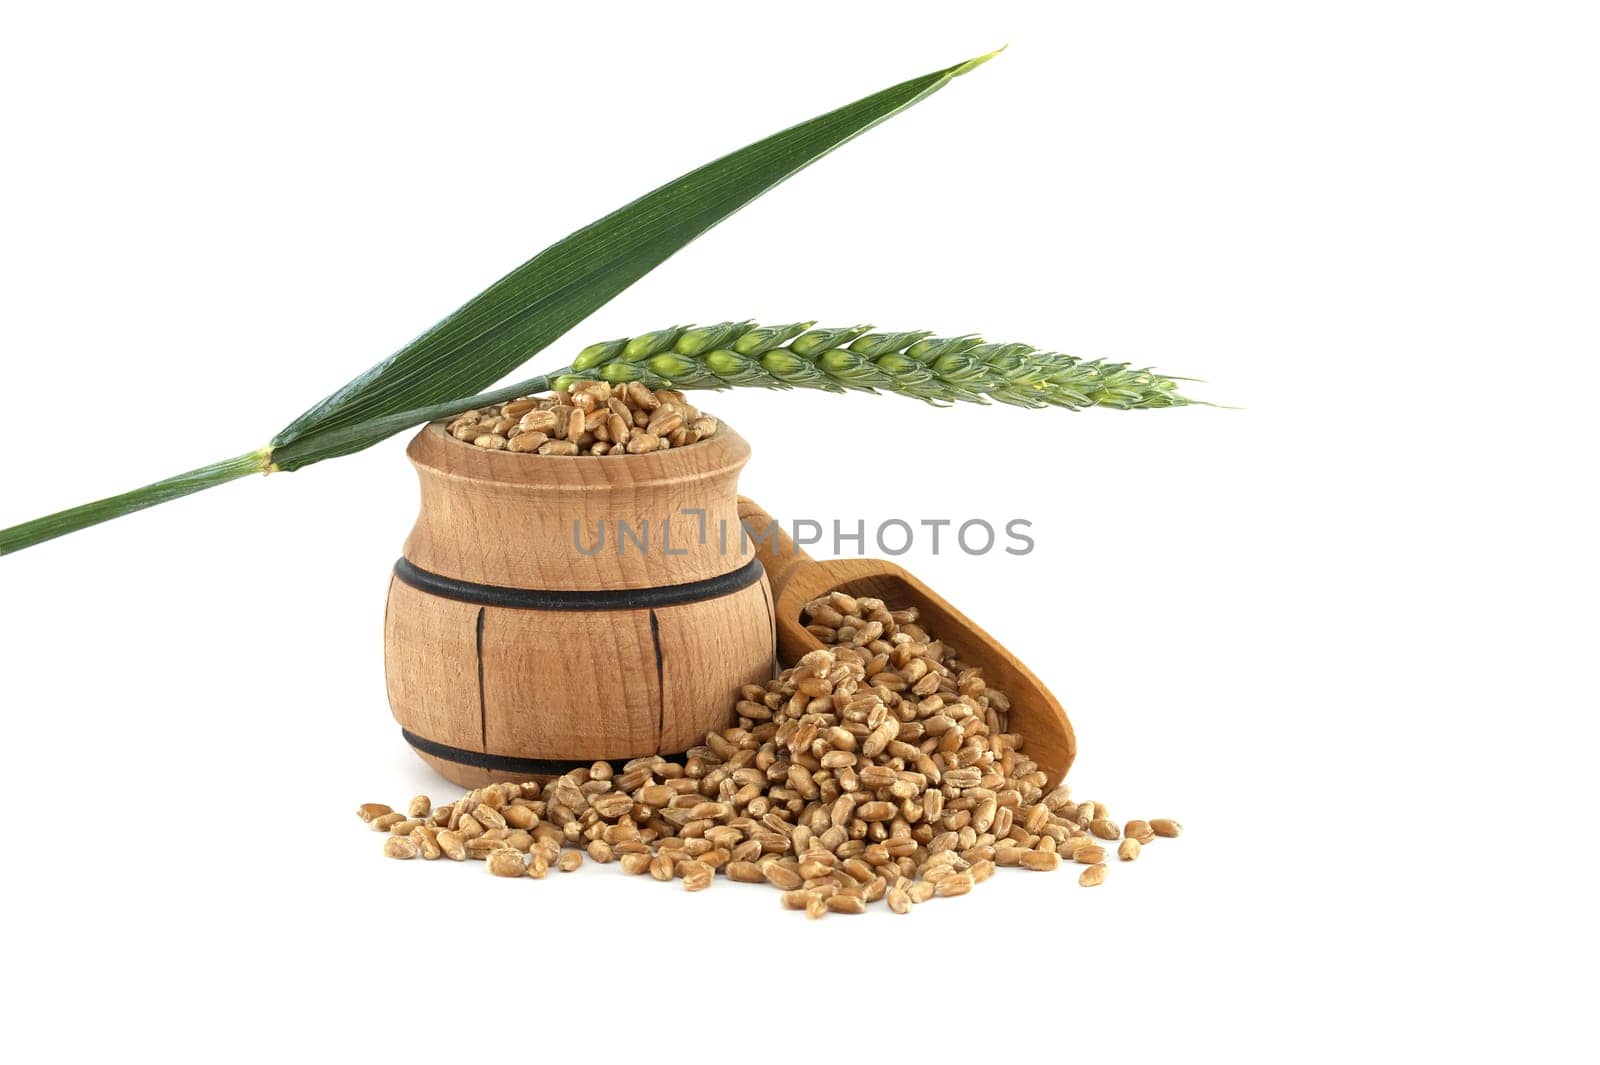 Closeup of a wooden barrel and scooper filled with wheat grains, positioned next to wheat ears isolated on a white background. Perfect for agricultural and food industry themes.